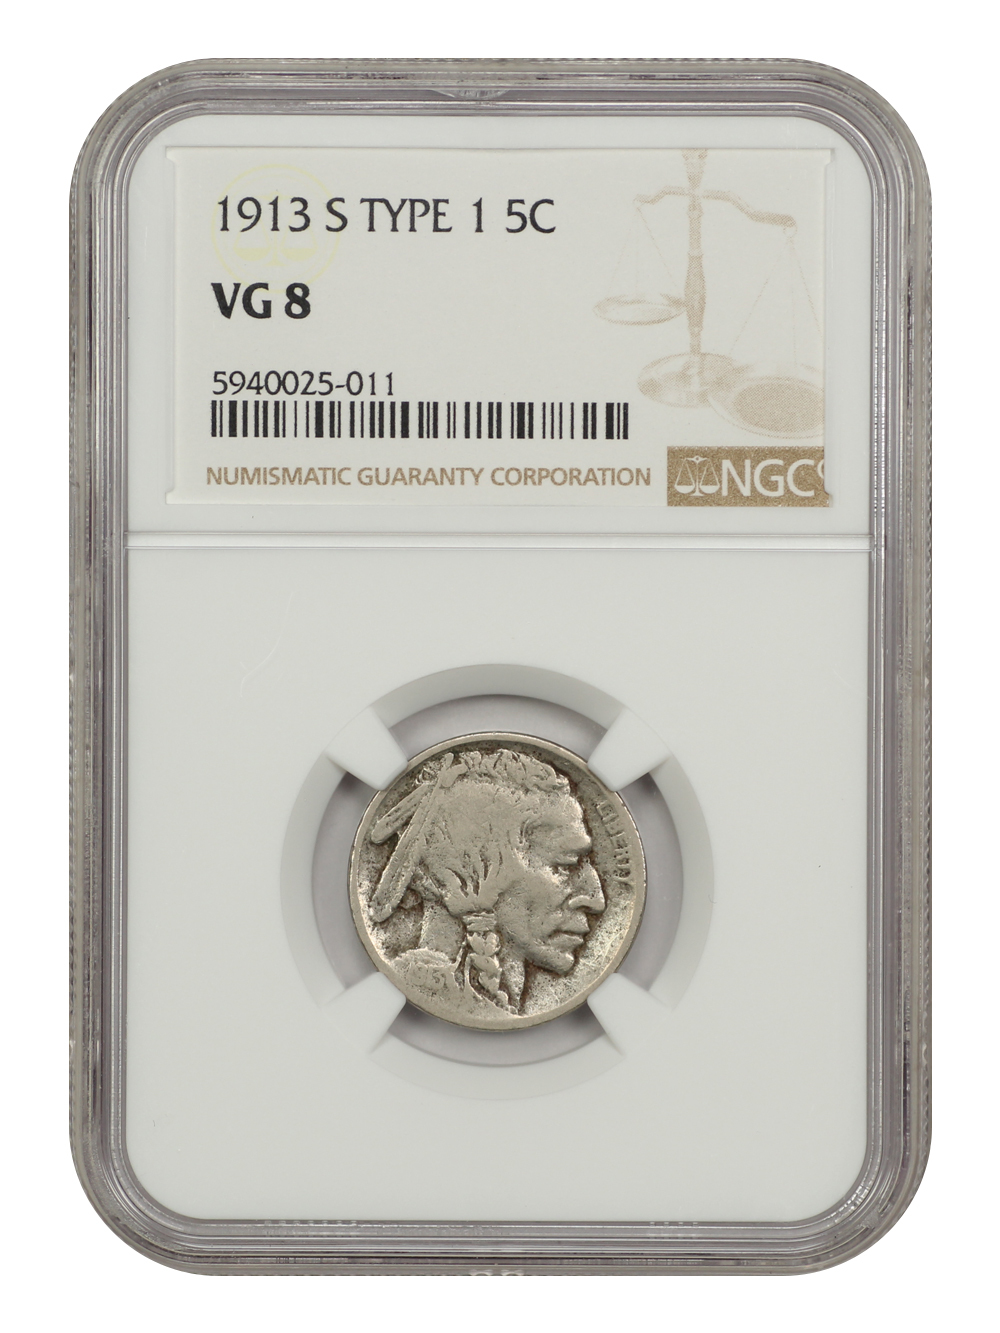 Primary image for 1913-S 5C Type 1 NGC VG08